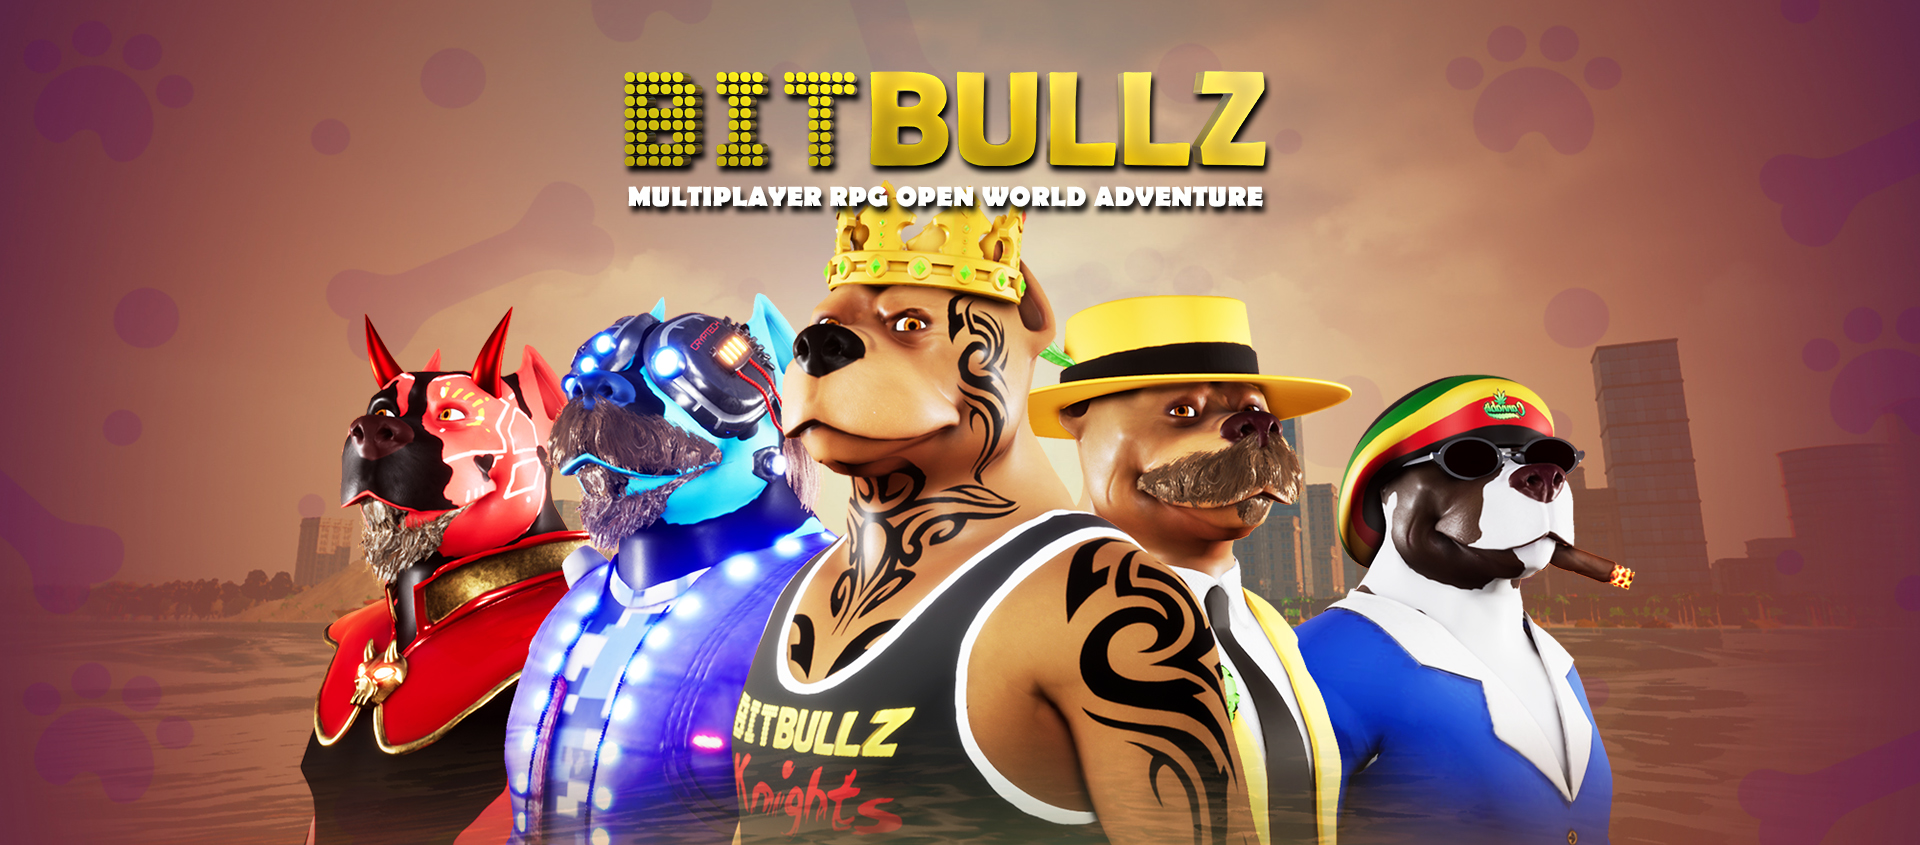 Introducing BitBullz.io Action Adventure RPG | play & earn video game.